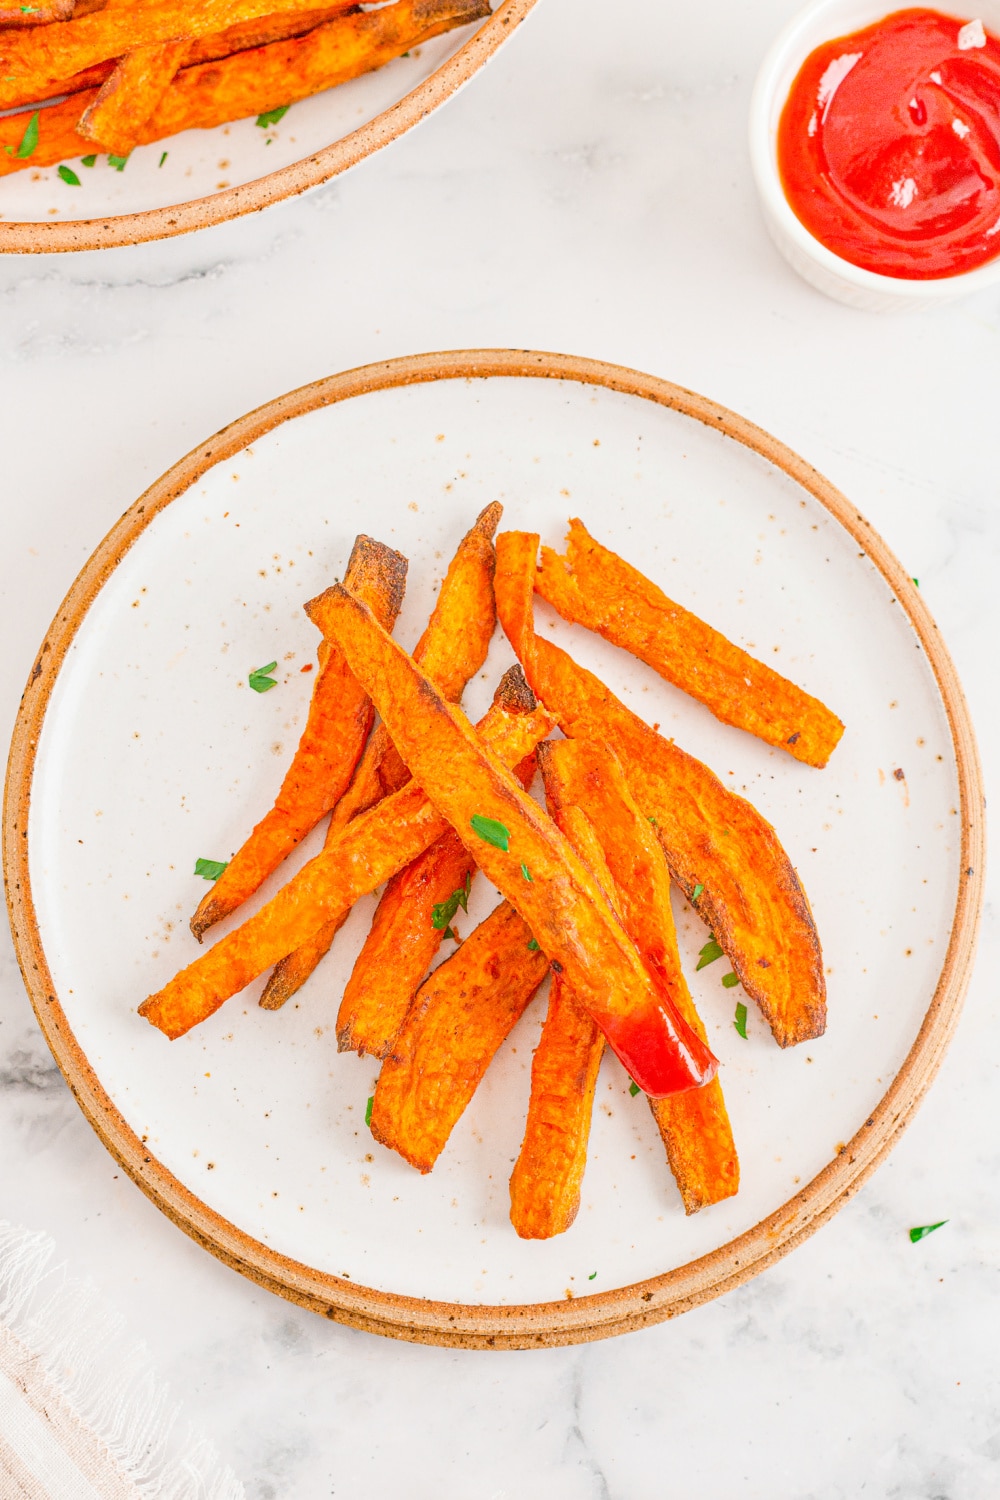 Sweet Potato Fries on white plate. One fry has been dipped in ketchup. 